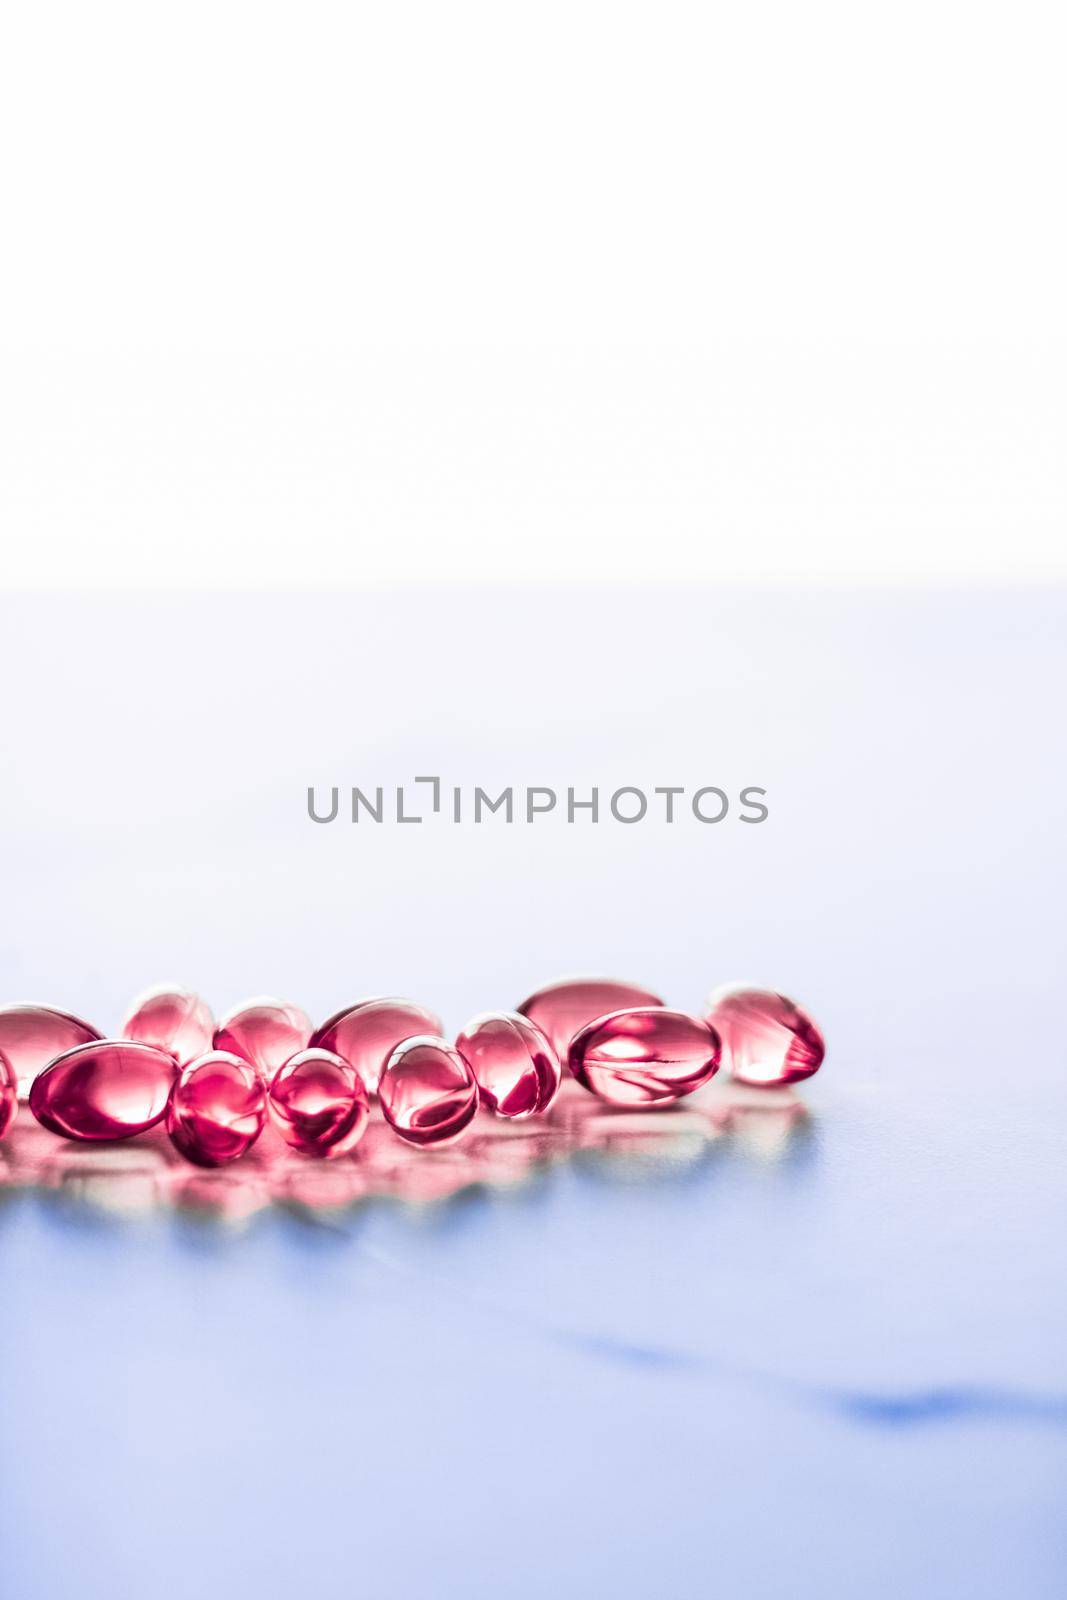 Red pills for healthy diet nutrition, supplements pill and probiotics capsules, healthcare and medicine as pharmacy and scientific research background by Anneleven